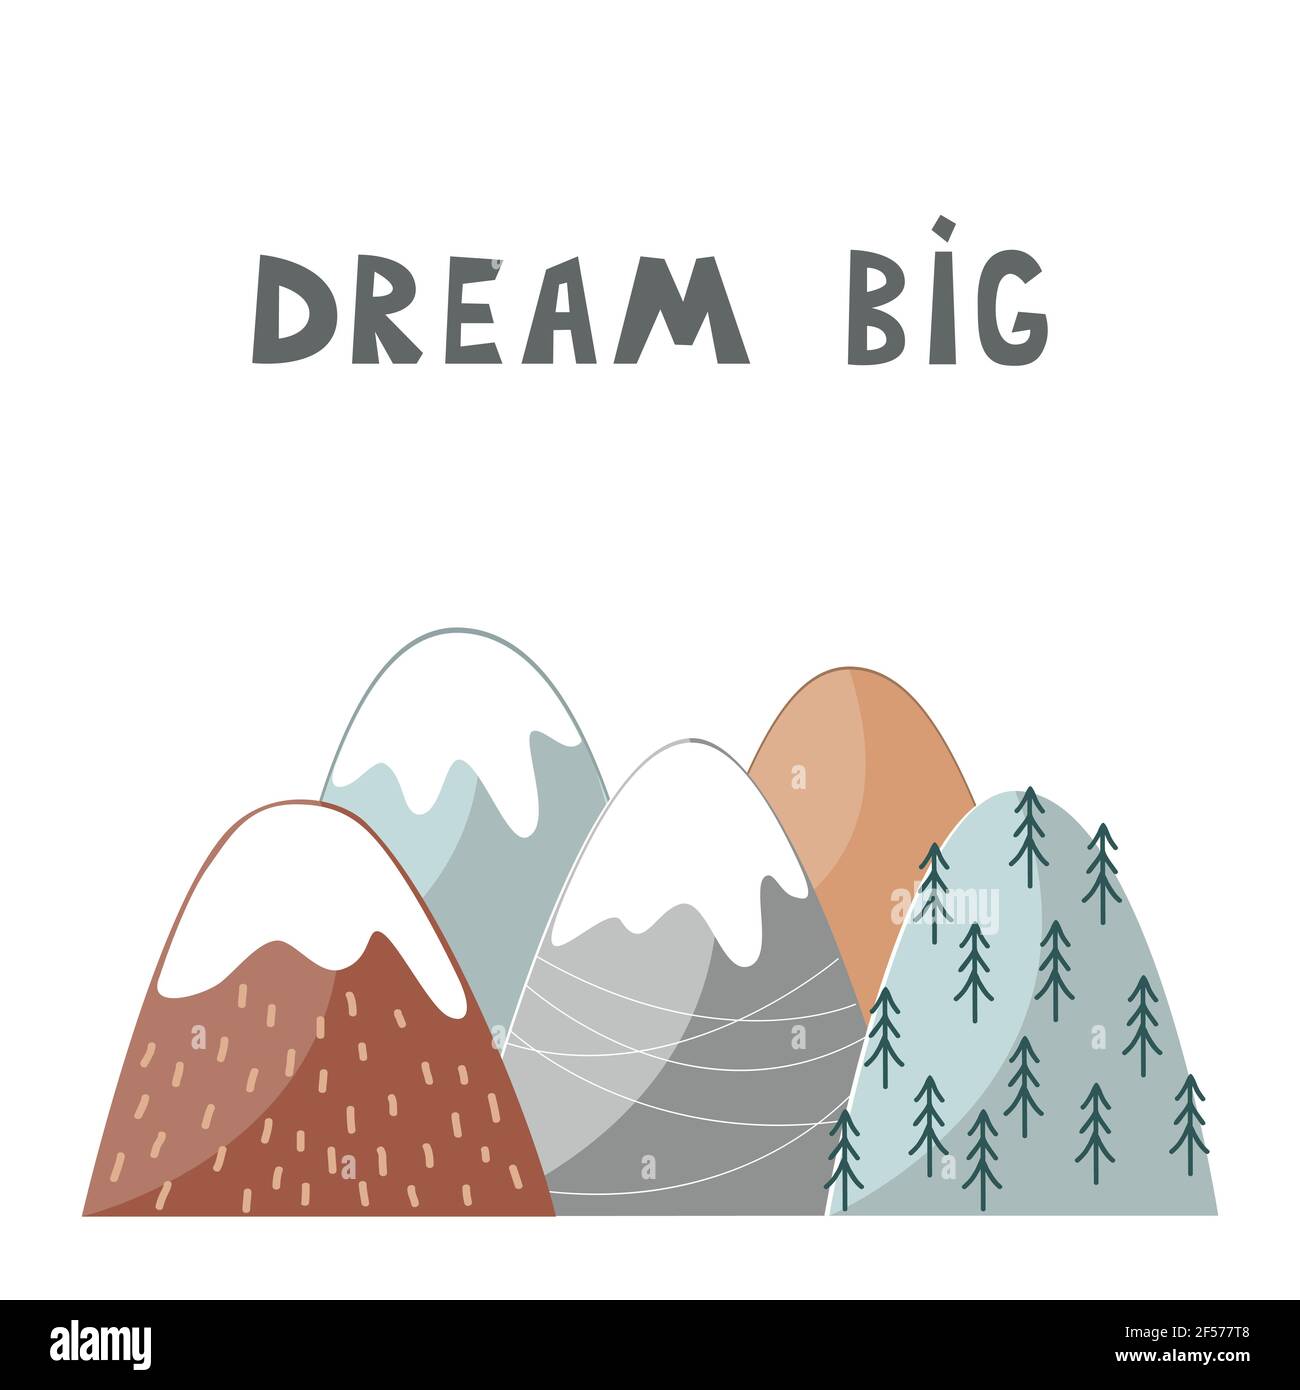 Nursery poster with mountains and hand drawn letters Dream big. Vector illustration in scandinavian style Stock Vector